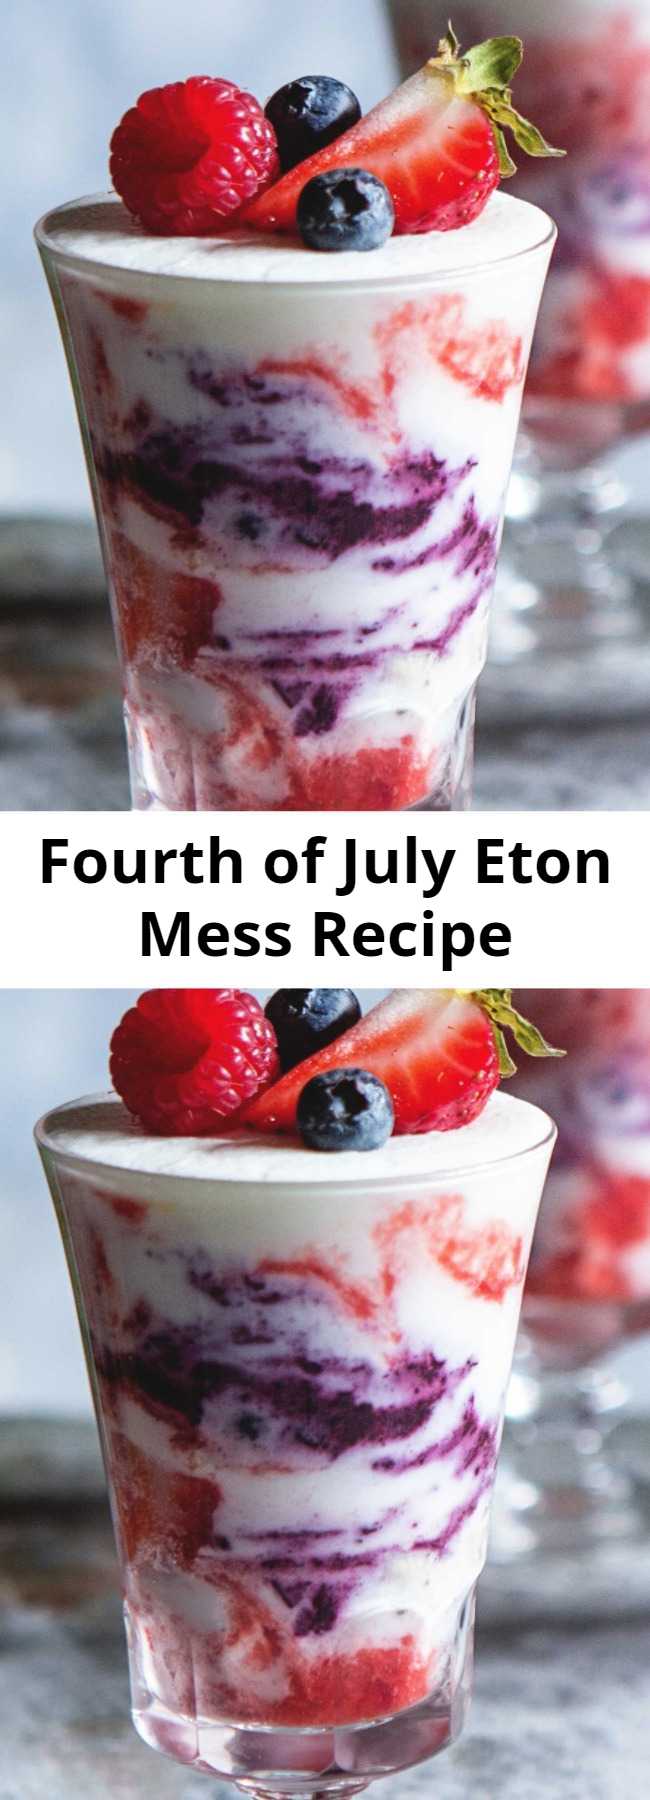 Fourth of July Eton Mess Recipe - There's no better way to celebrate American Independence than with a throwback British dessert. After fireworks, we dessert.